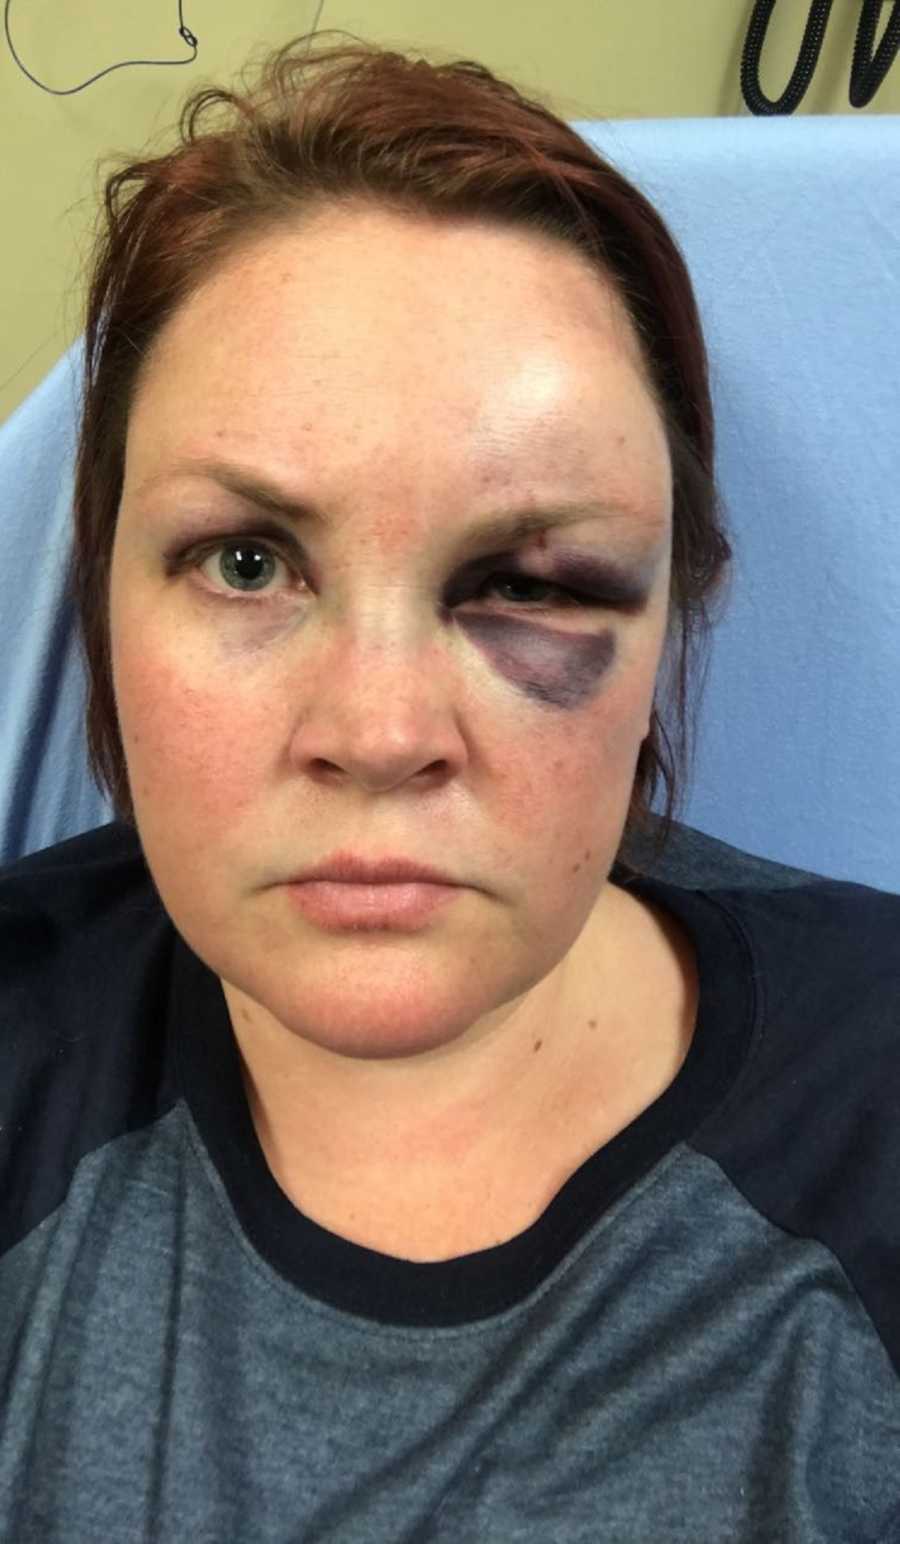 Alcoholic woman sits in hospital with a purple and swollen eye